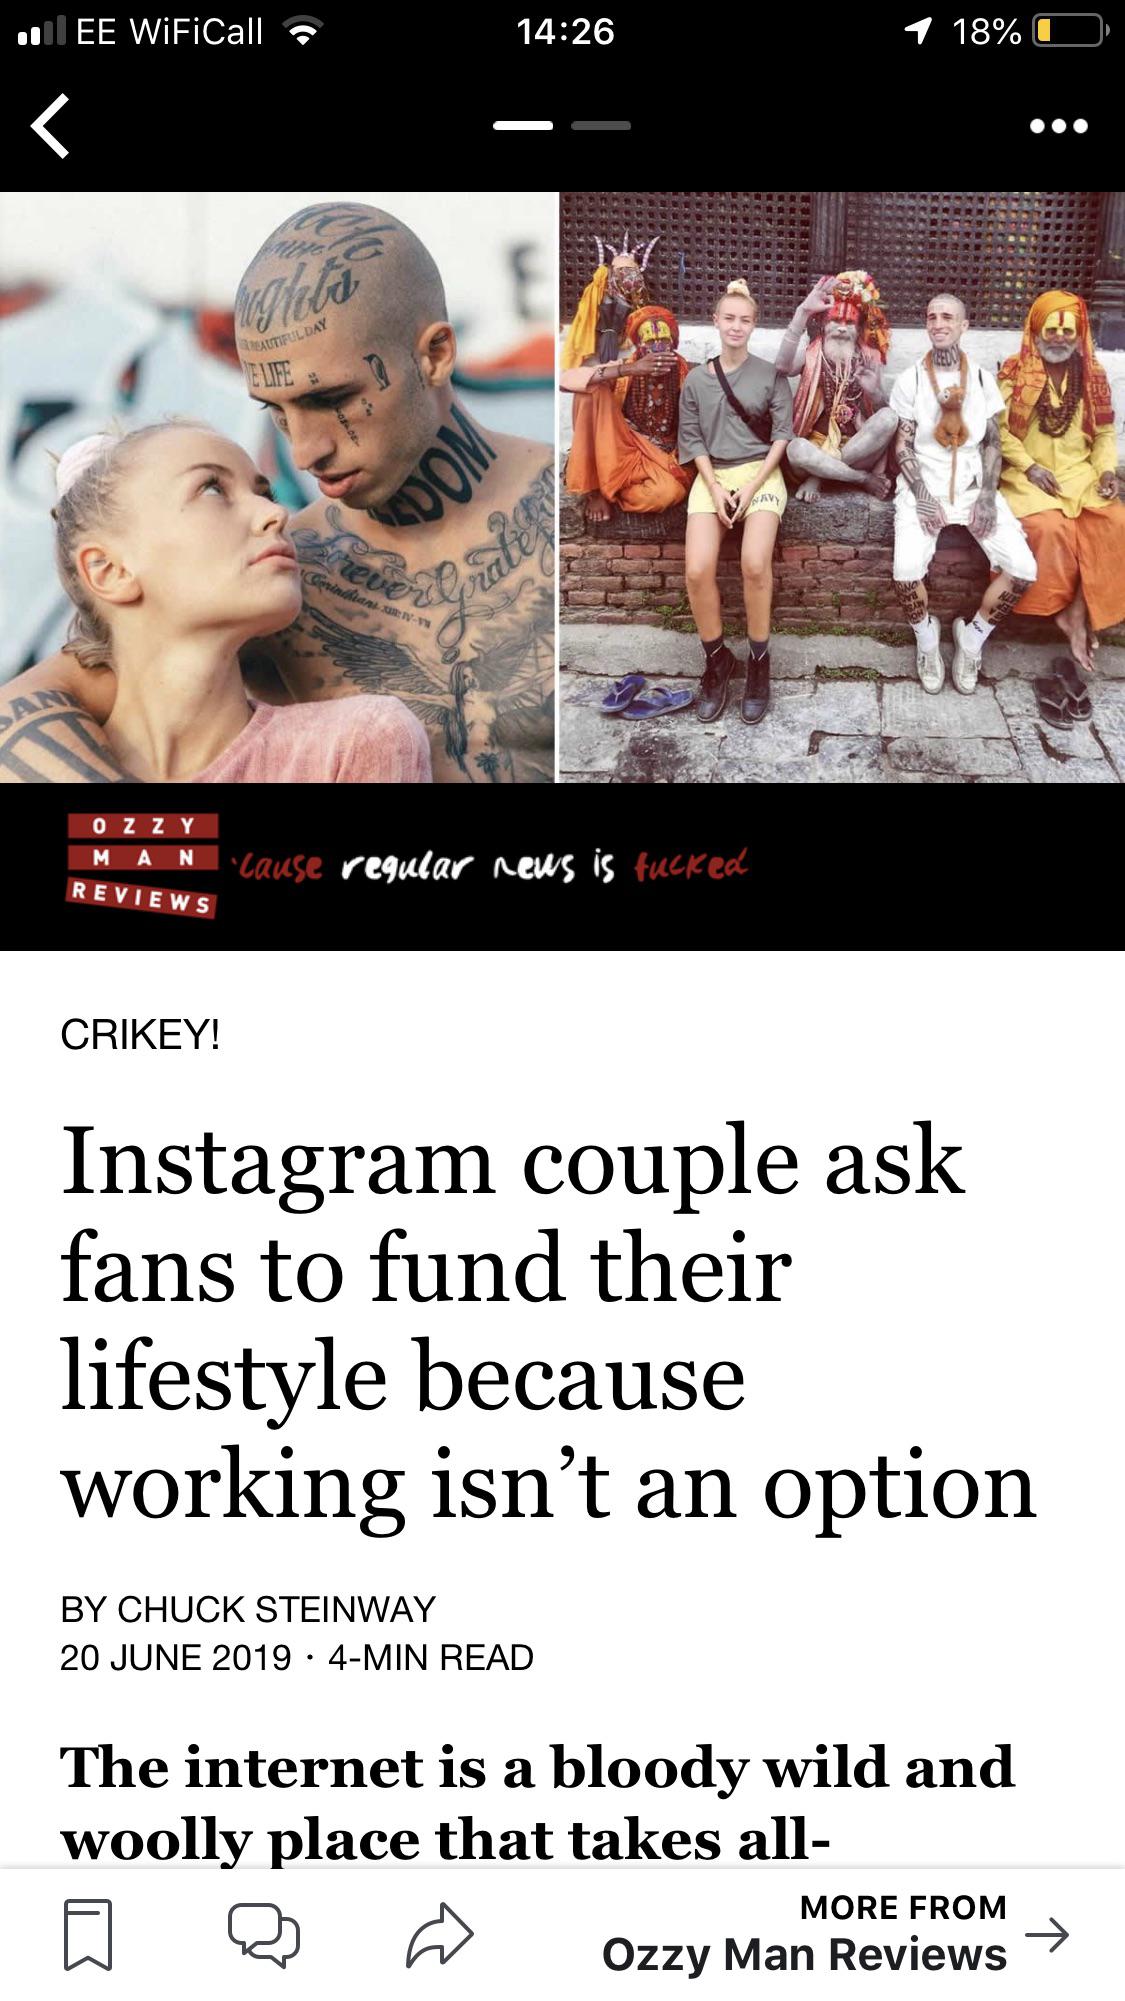 ... Ee WiFiCall a 1 18%O Brautifulda Elife O Z Zy 'Cause regular news is fucked Reviews Crikey! Instagram couple ask fans to fund their lifestyle because working isn't an option By Chuck Steinway 4Min Read The internet is a bloody wild and woolly place…